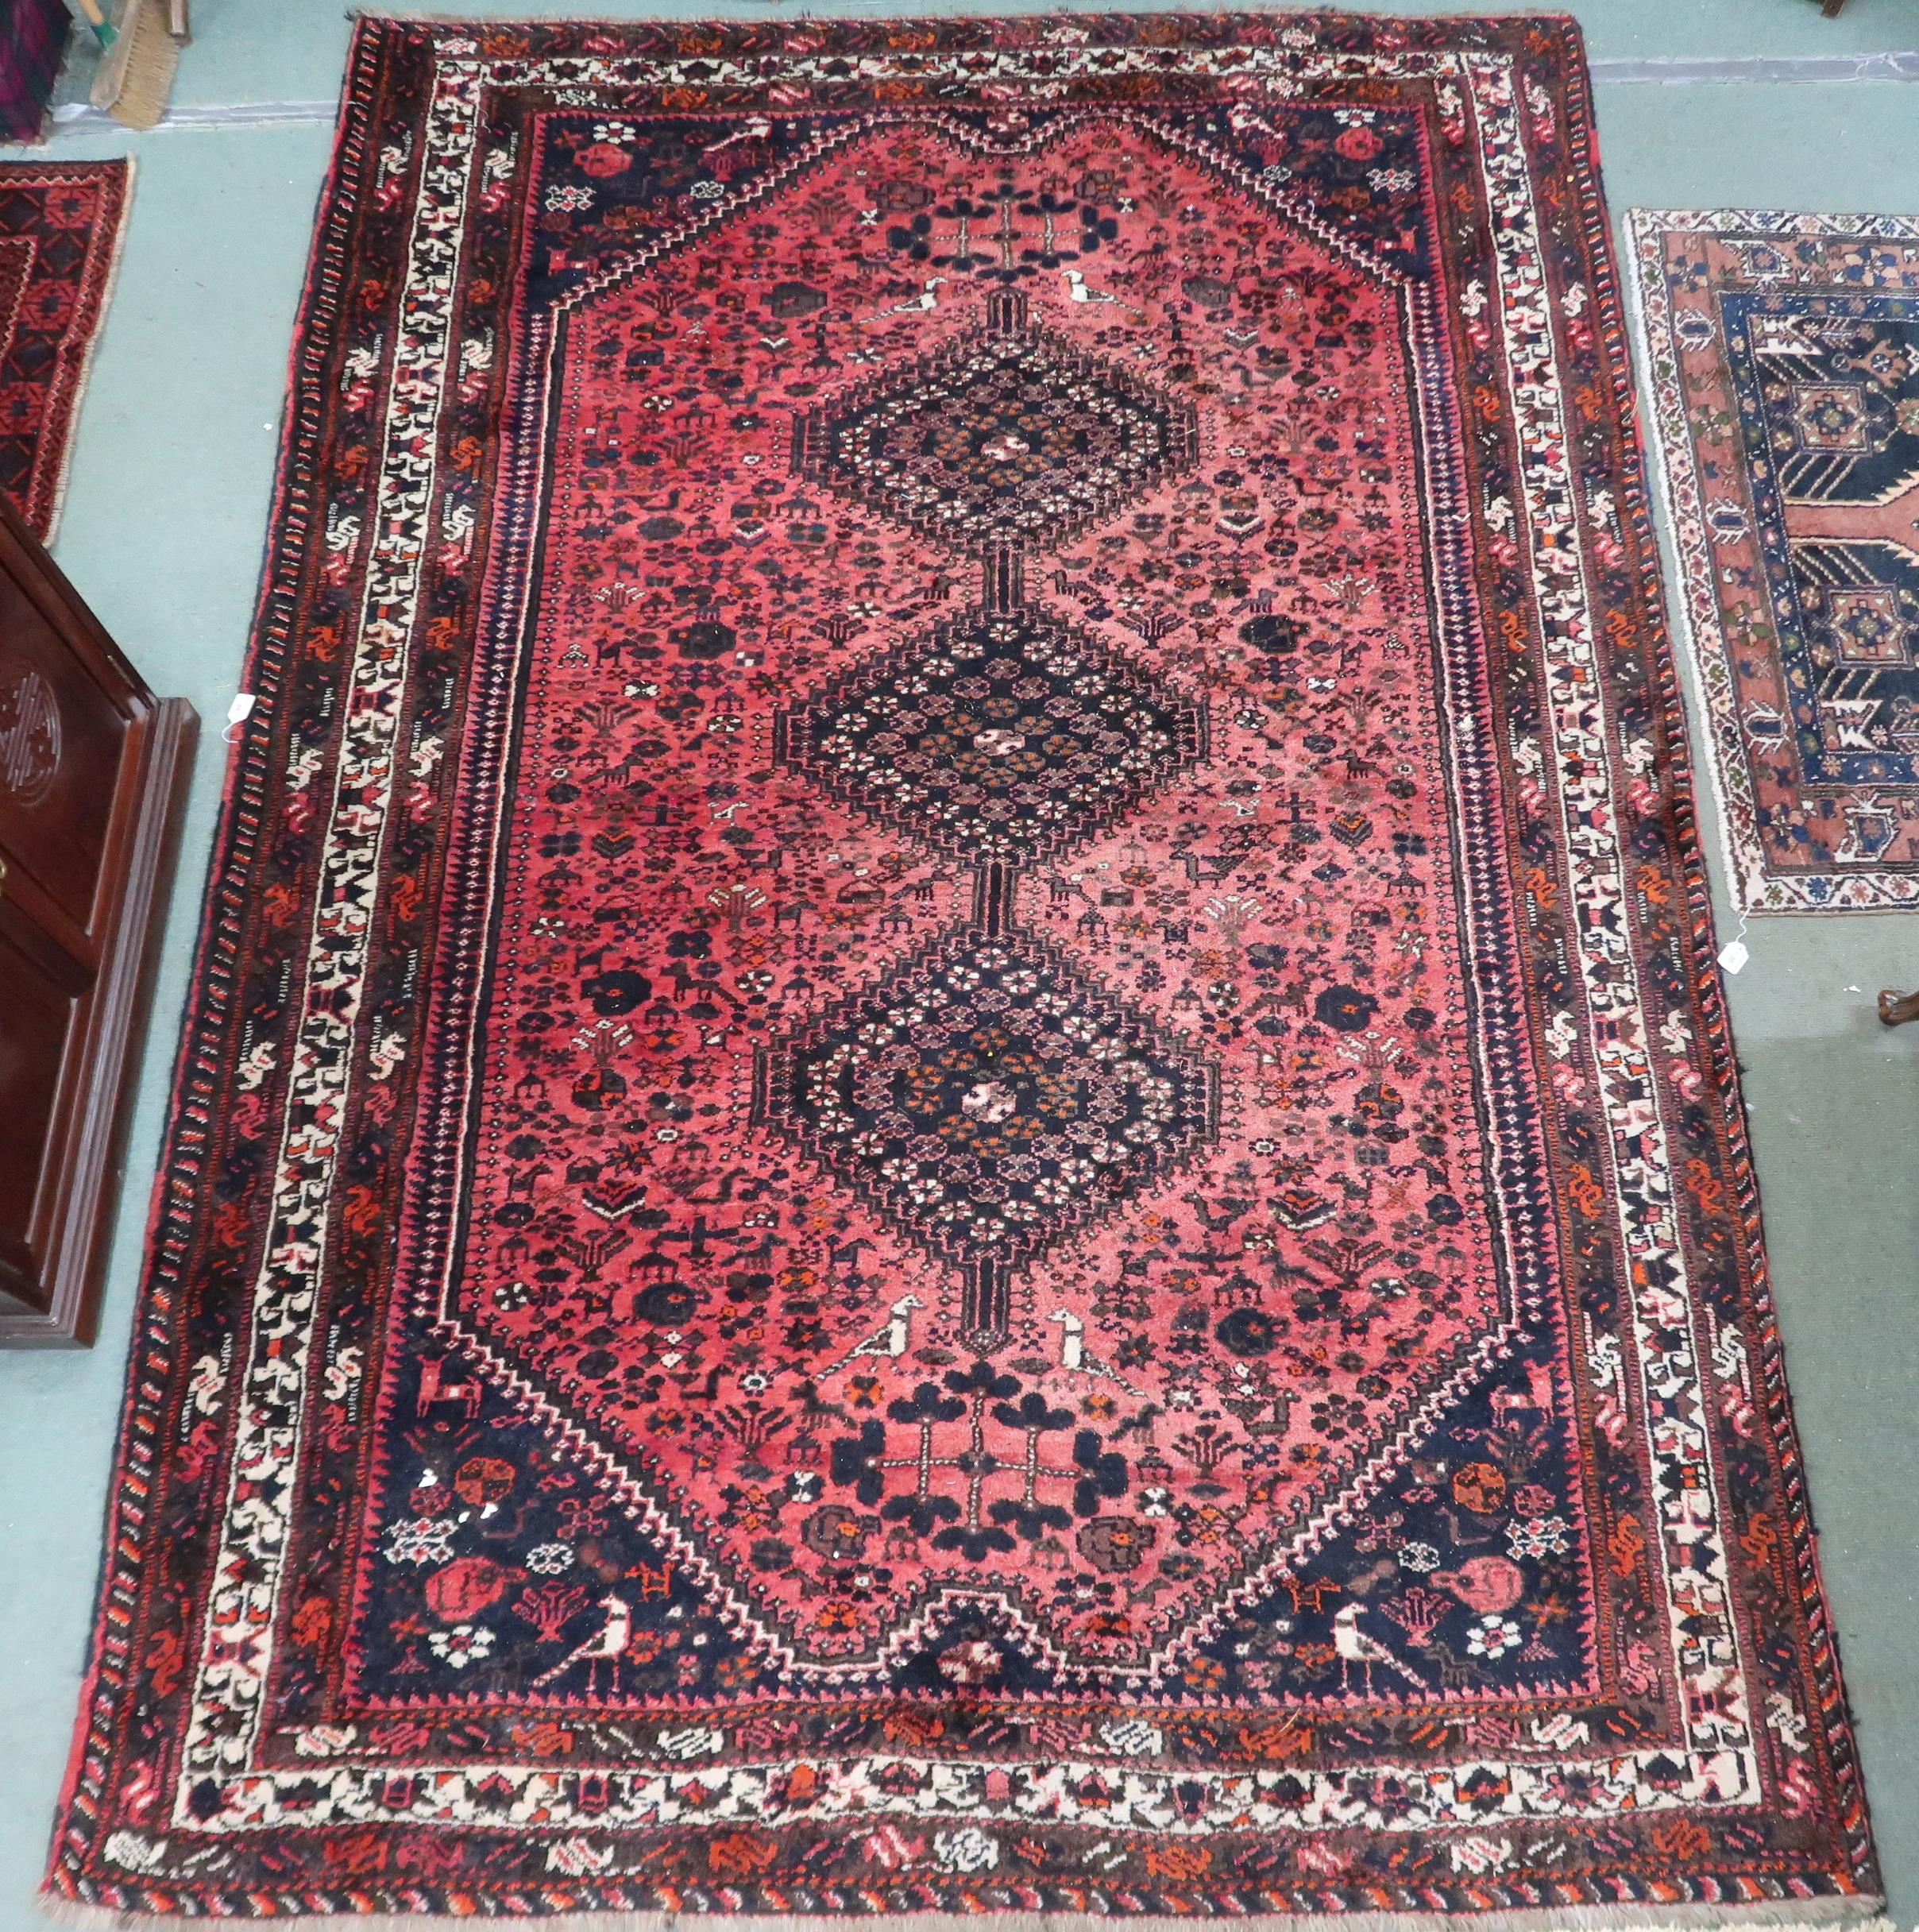 A red ground Hamadan rug with three diamond form medallions and dark blue spandrels within